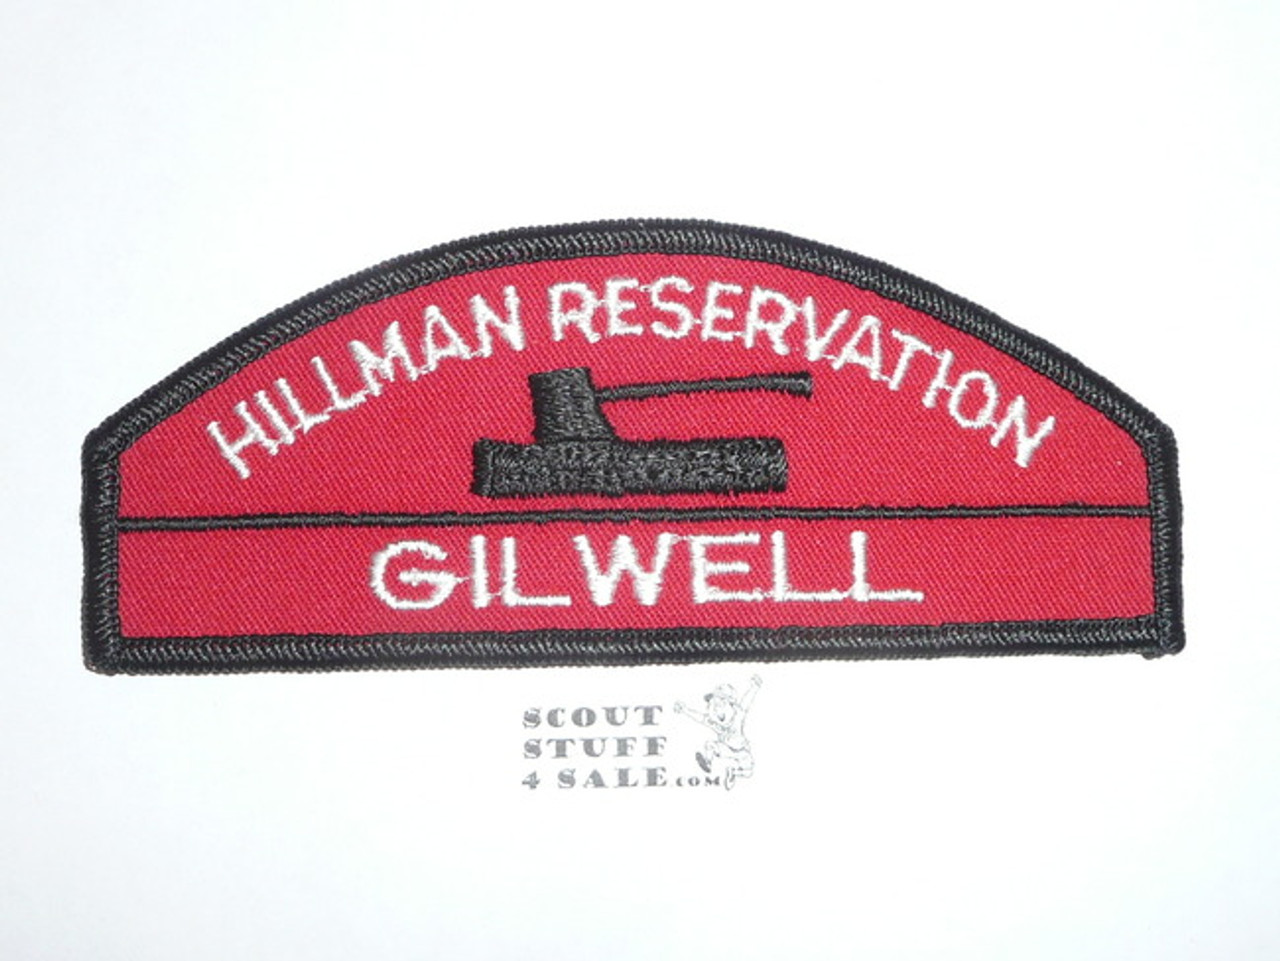 Allegheny Trails Council ta1 CSP, Hillman Scout Reservation Gilwell